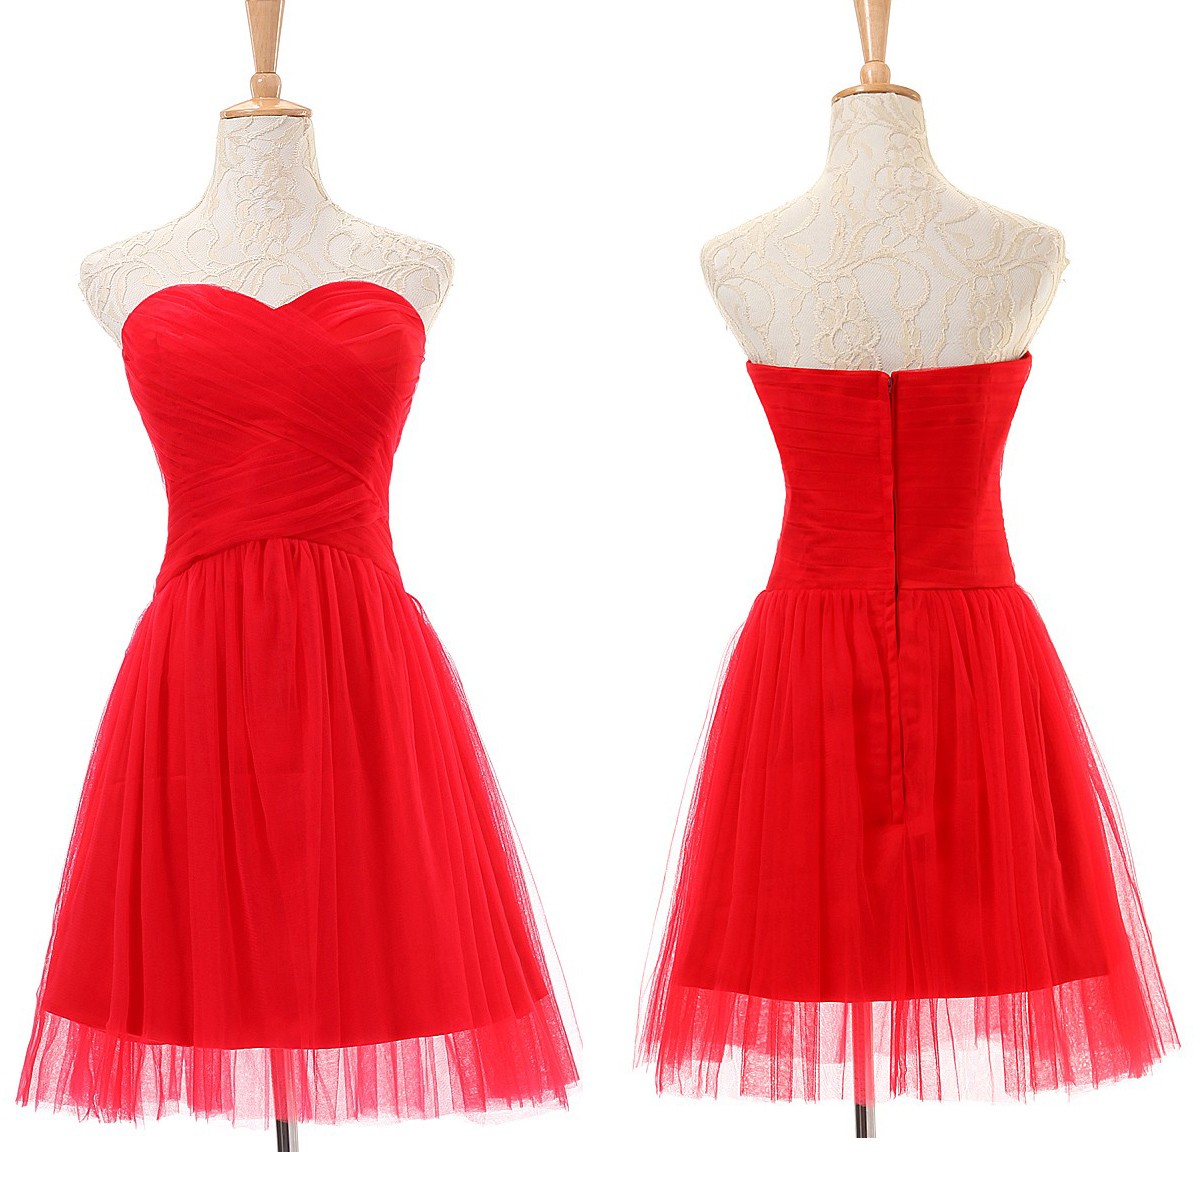 Luxurious A-Line Sweetheart Knee Length Tulle Red Prom Dress With Ruched